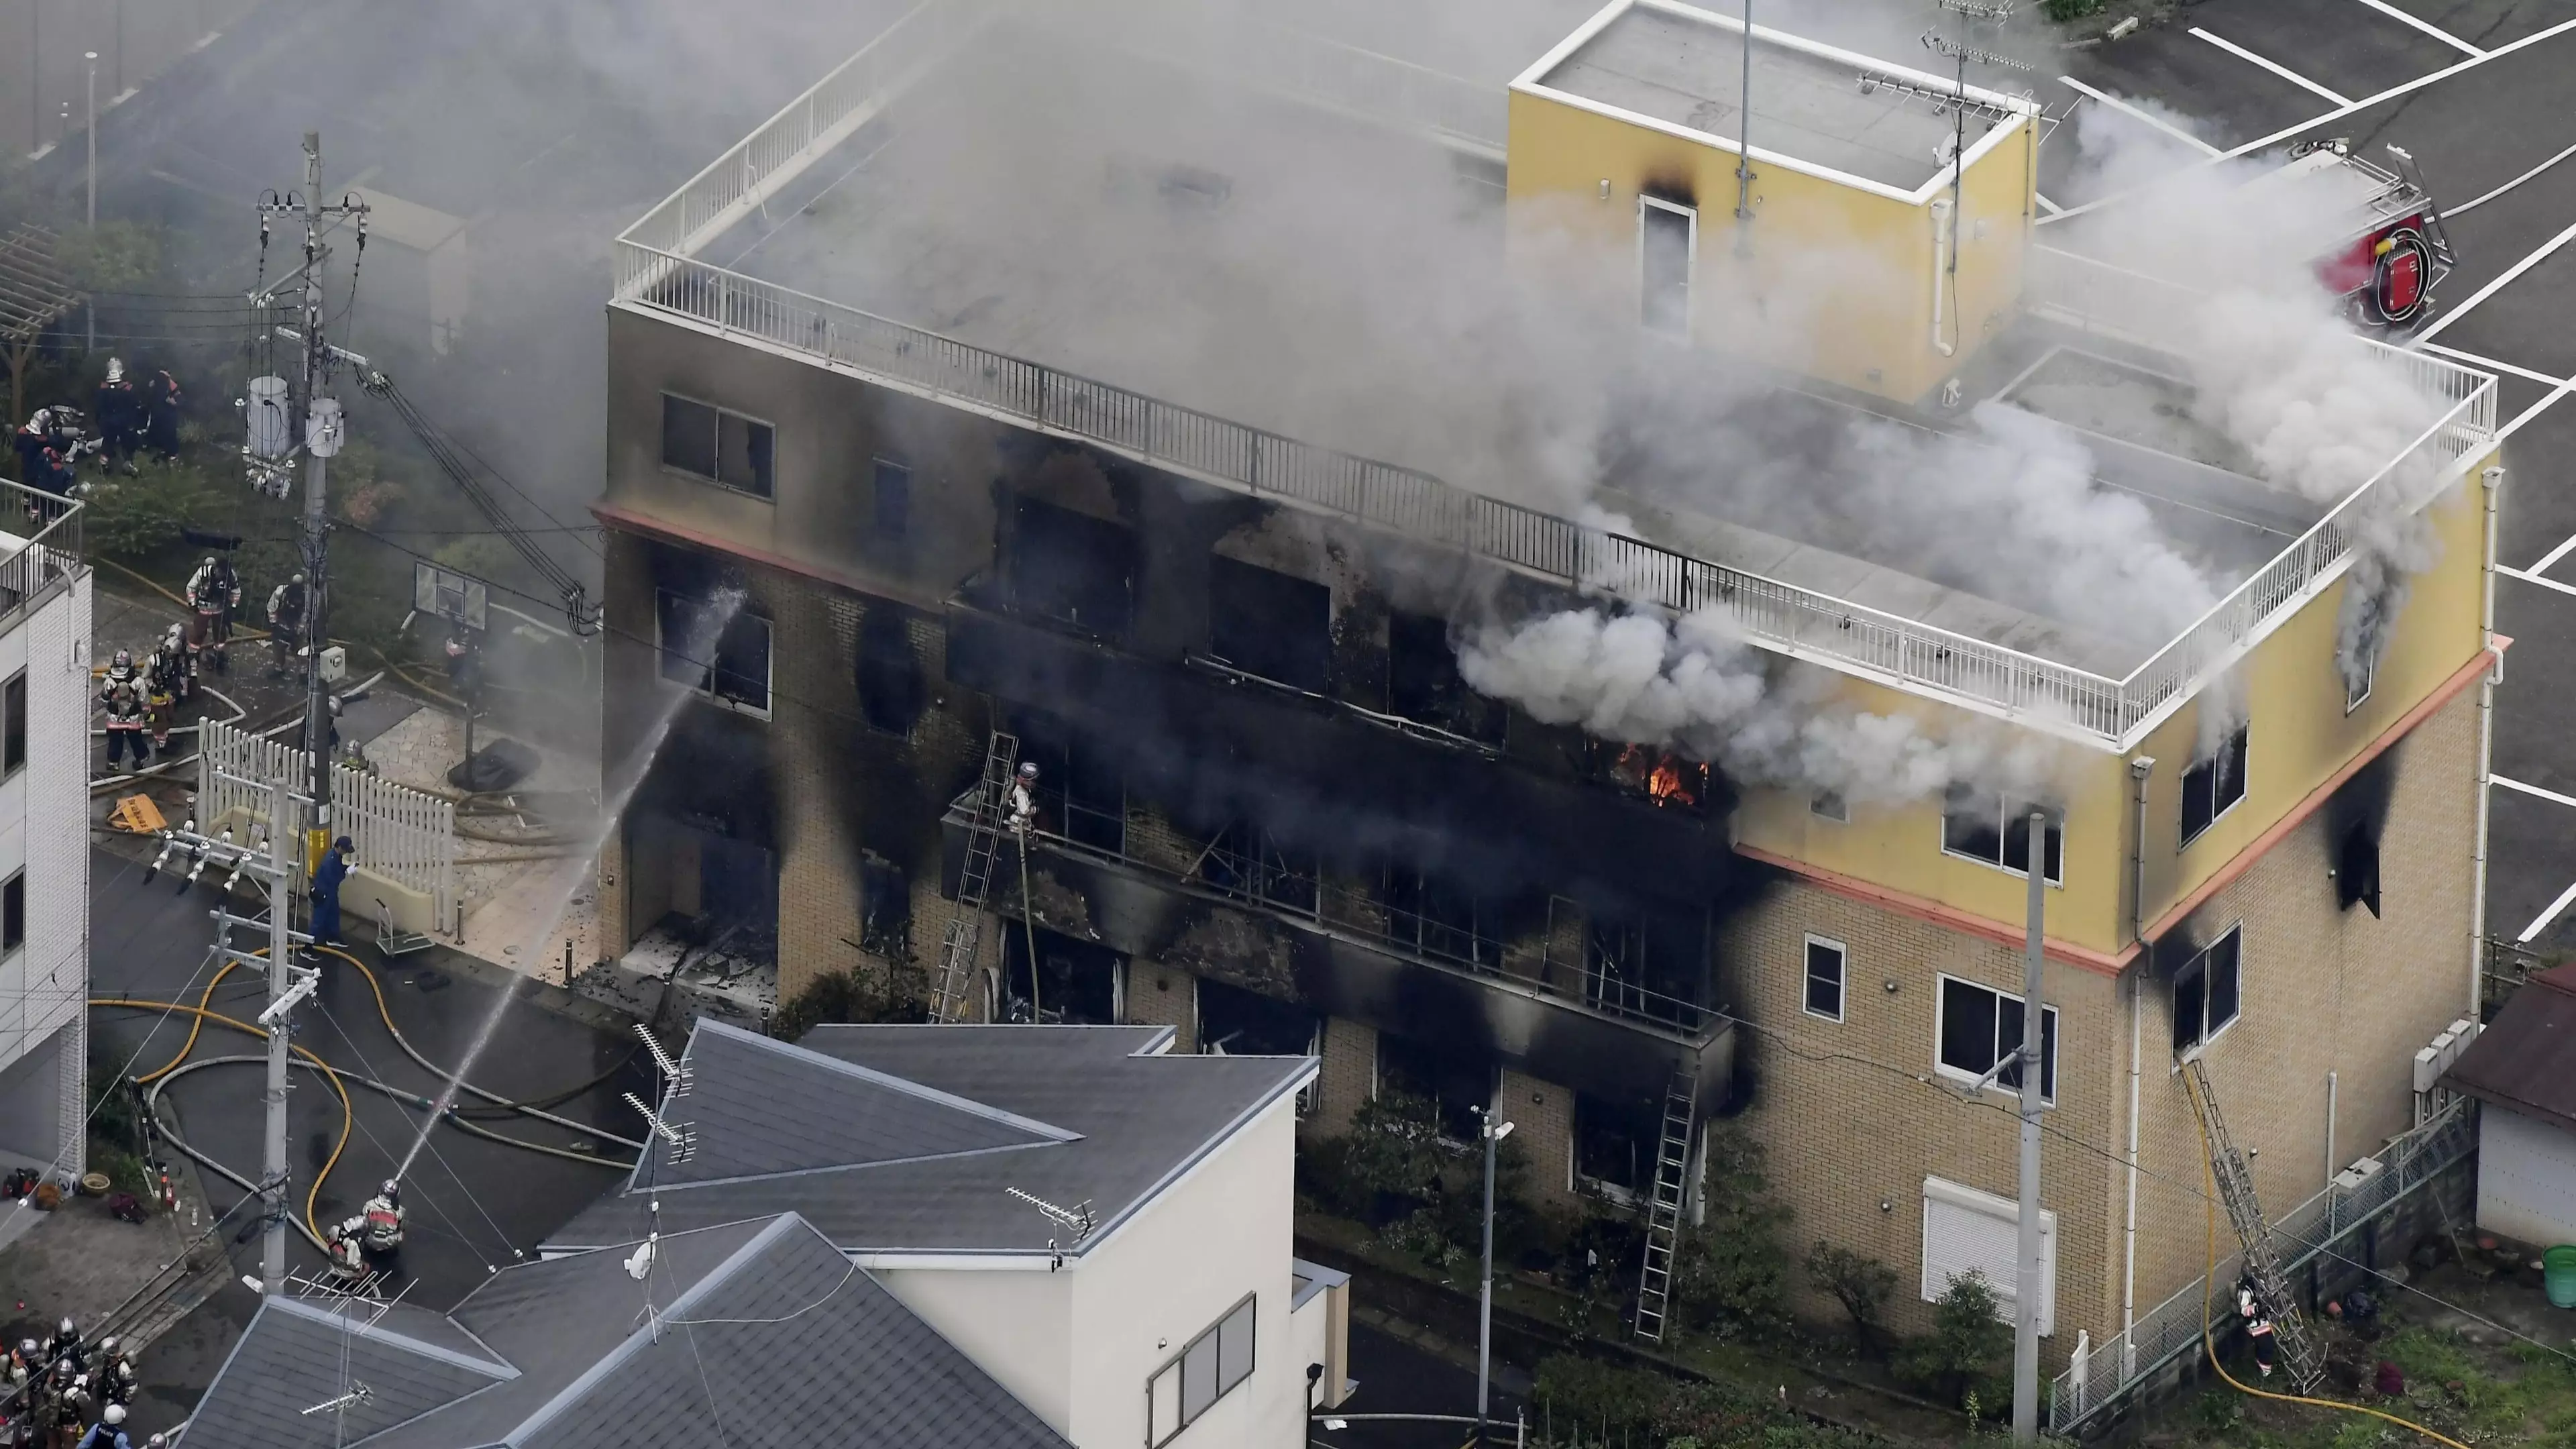 At Least 33 People Dead In Fire At Kyoto Animation Studio